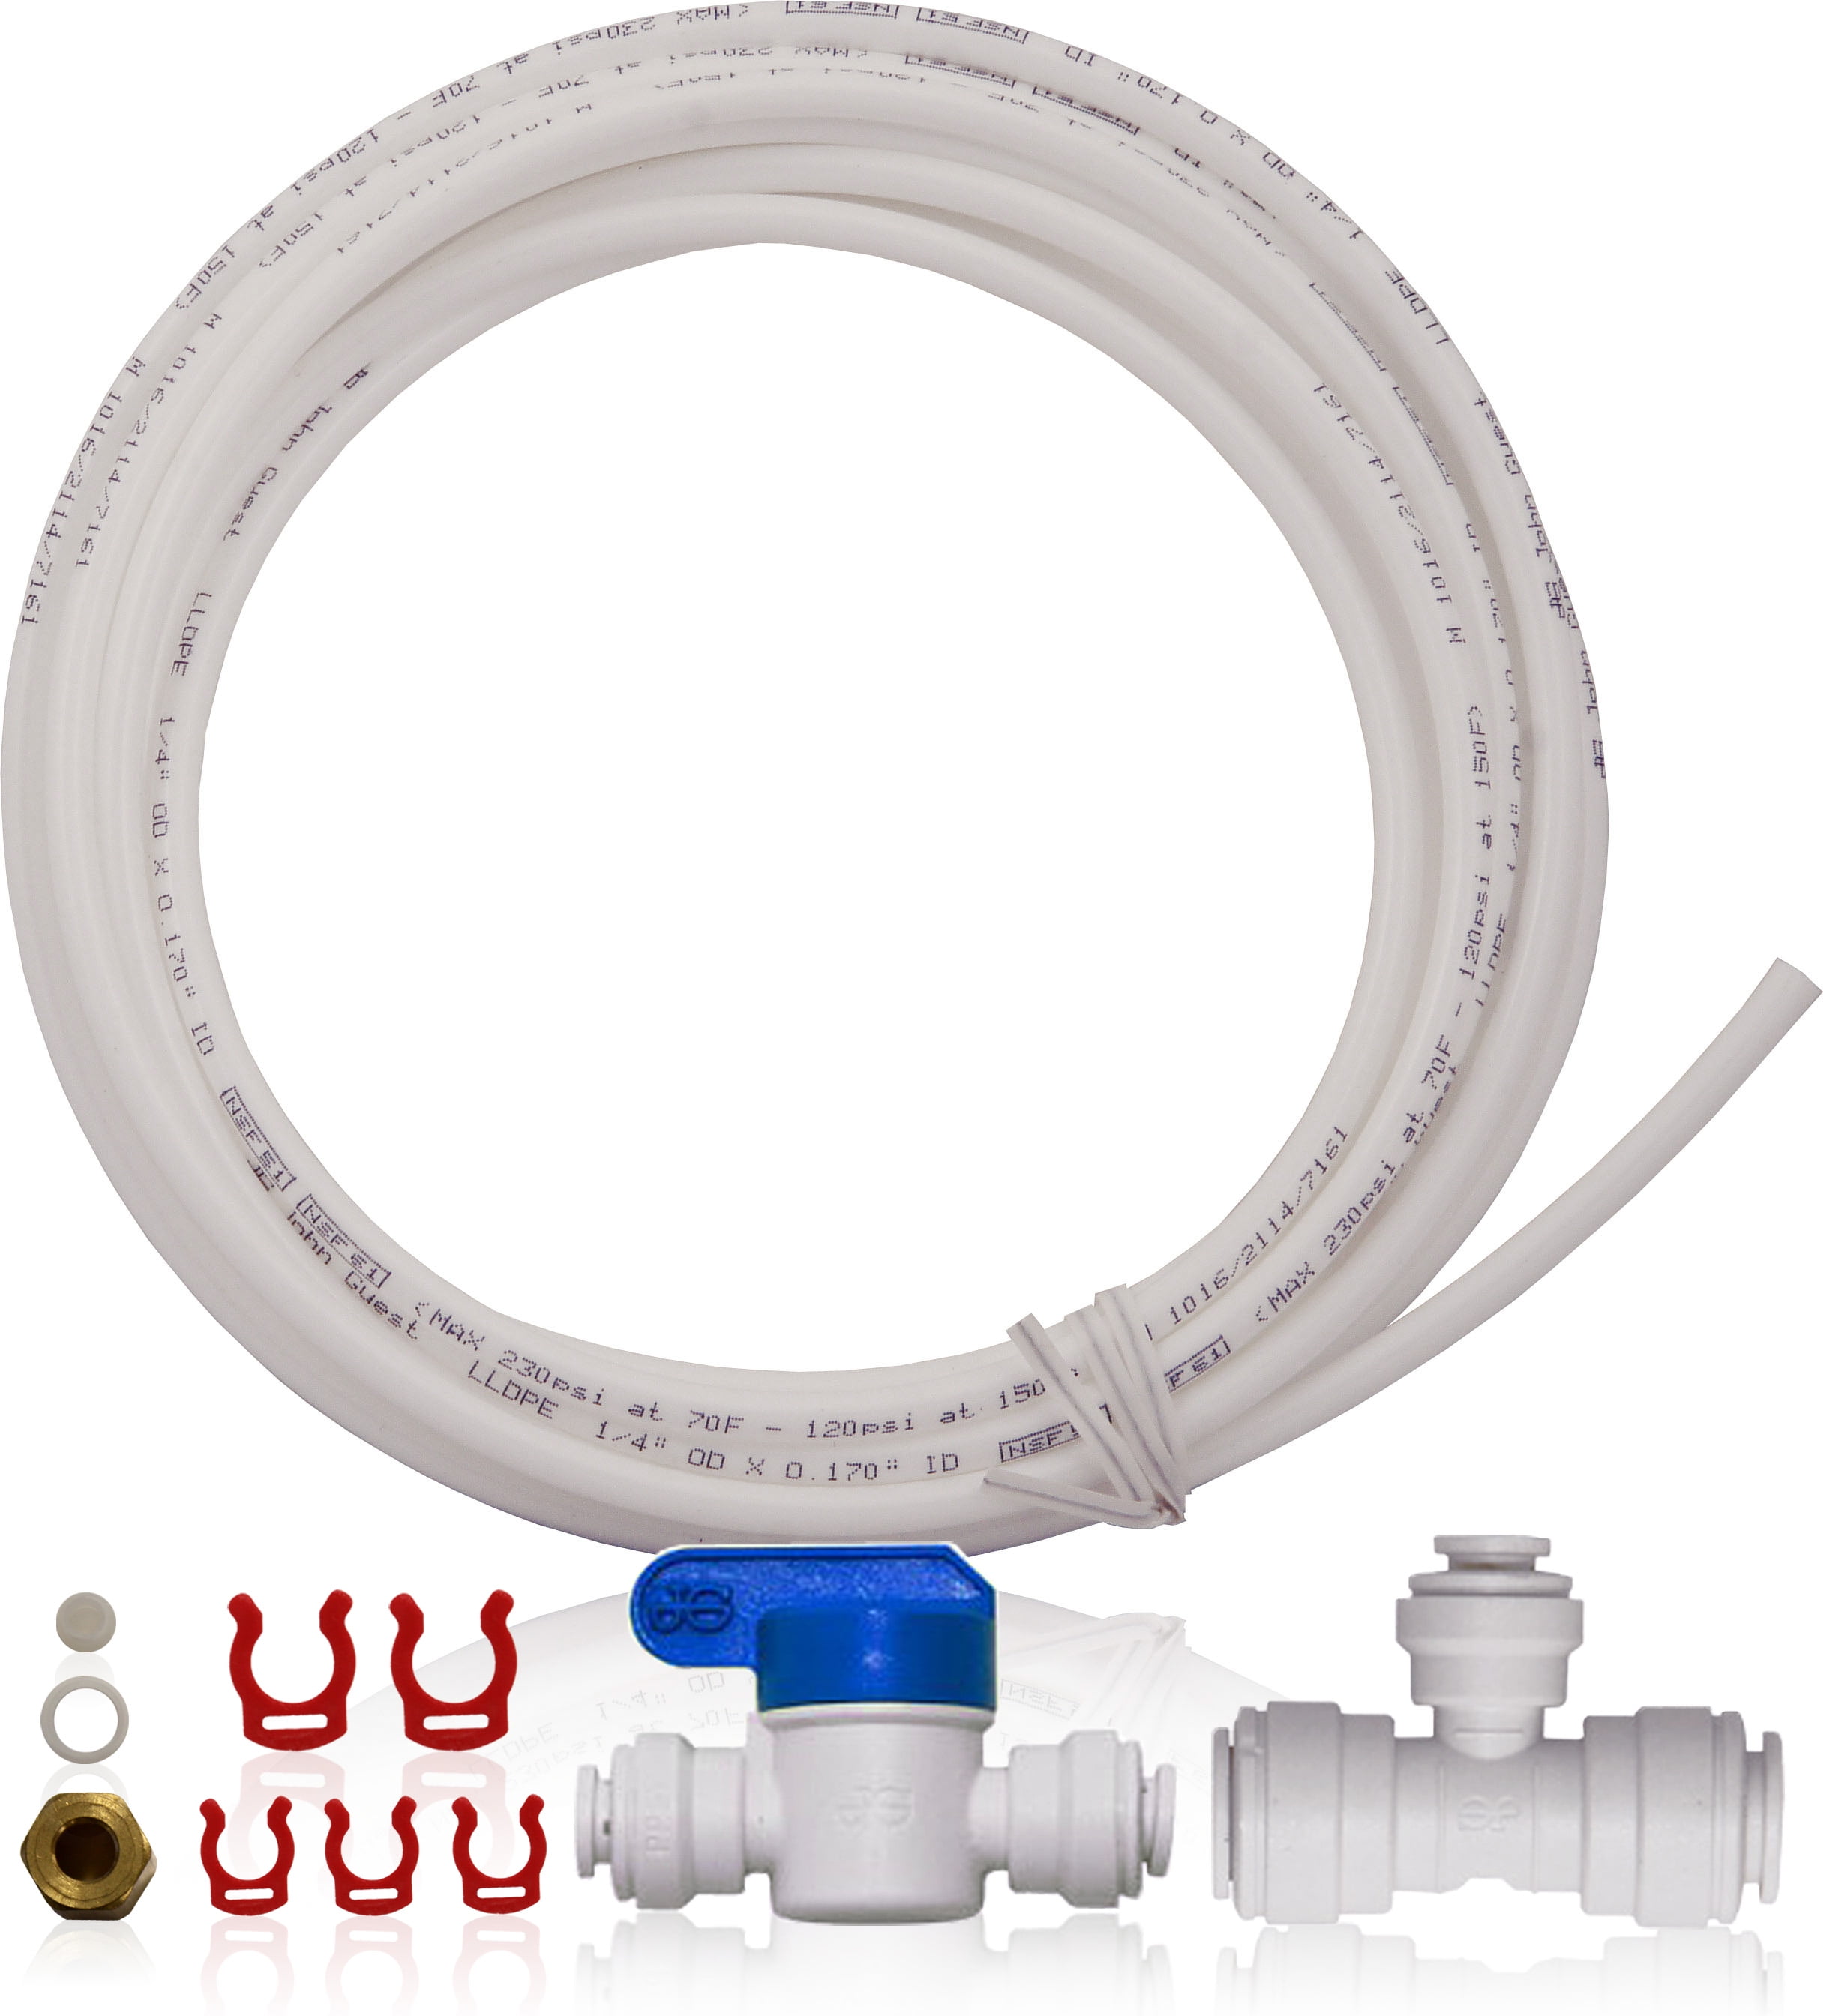 APEC ICEMAKERKIT3814RO Ice Maker Kit for Reverse Osmosis System with upgraded 3/8" Output